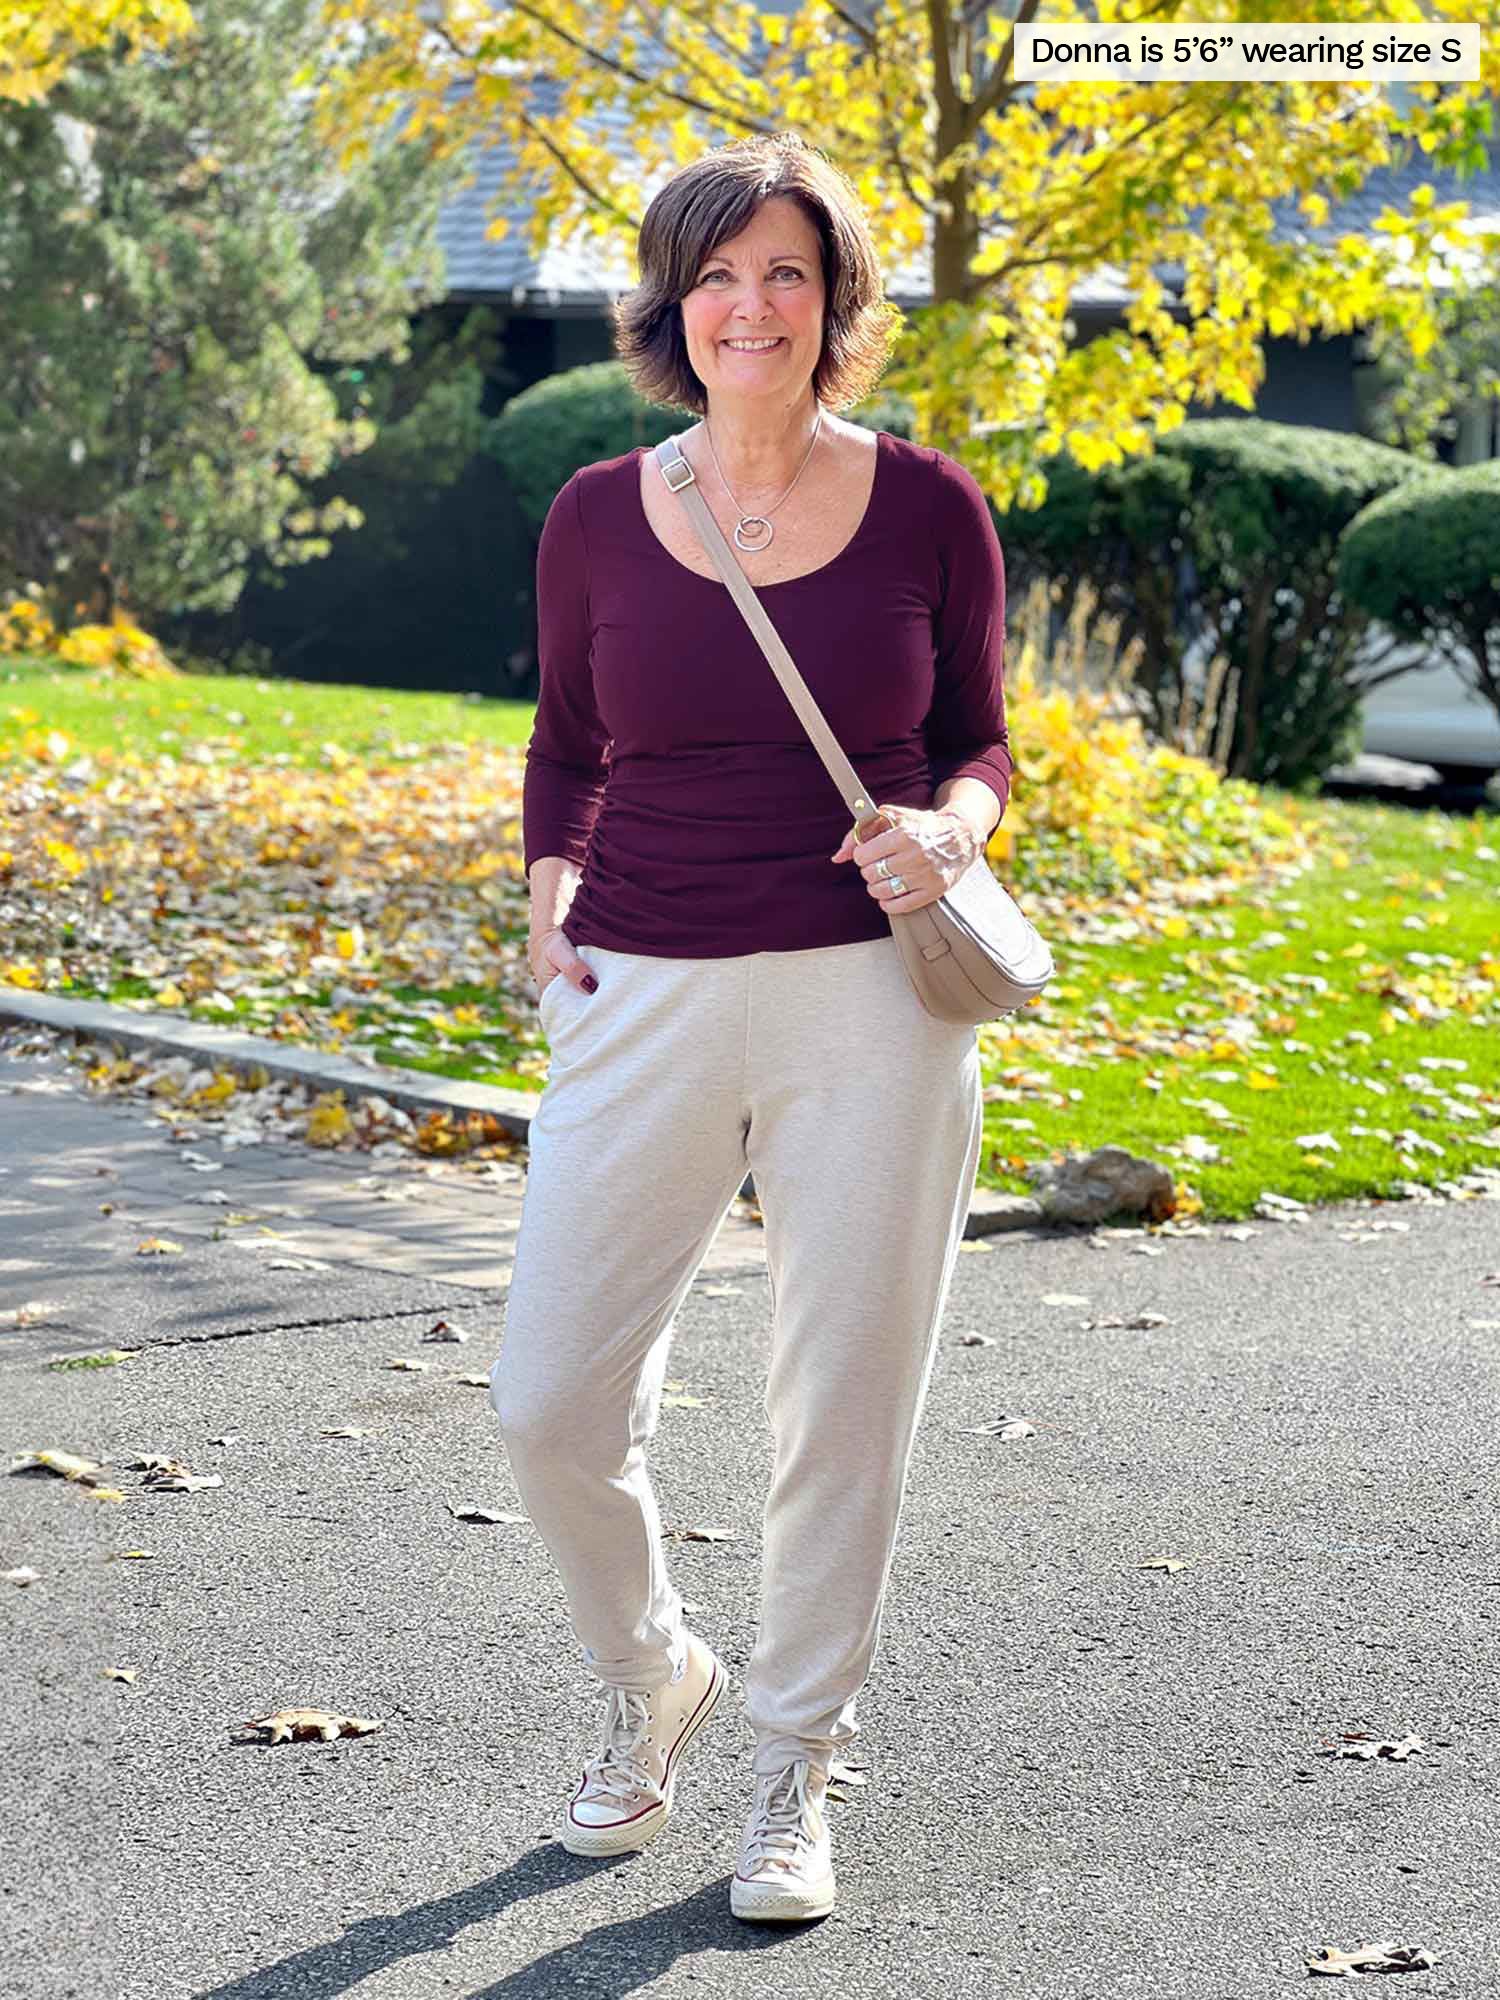 Linaya luxe fleece jogger, Sustainable women's clothing made in Canada